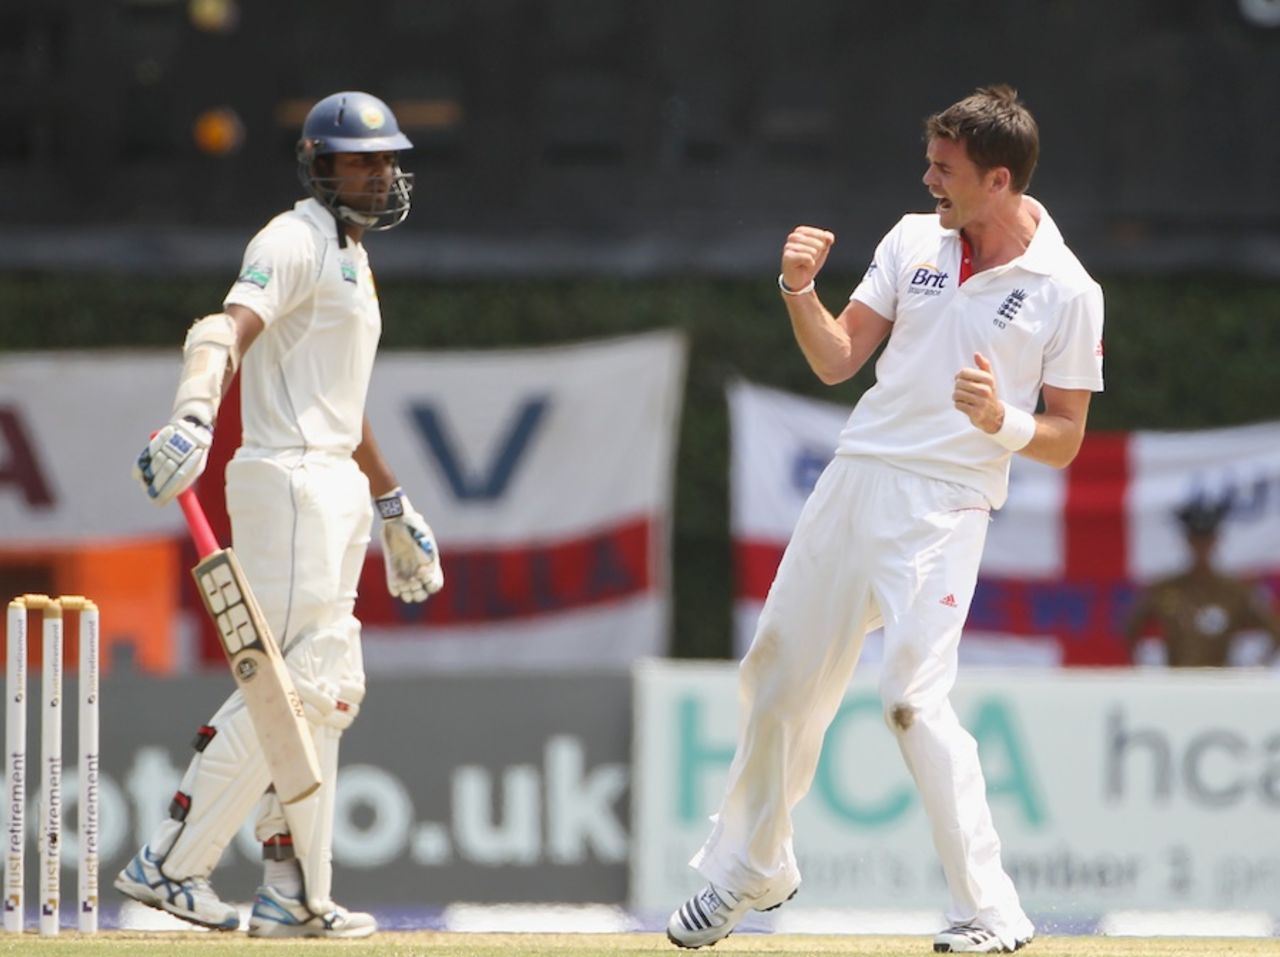 James Anderson celebrates after trapping Lahiru Thirimanne lbw, Sri Lanka v England, 2nd Test, Colombo, 1st day, April 3, 2012